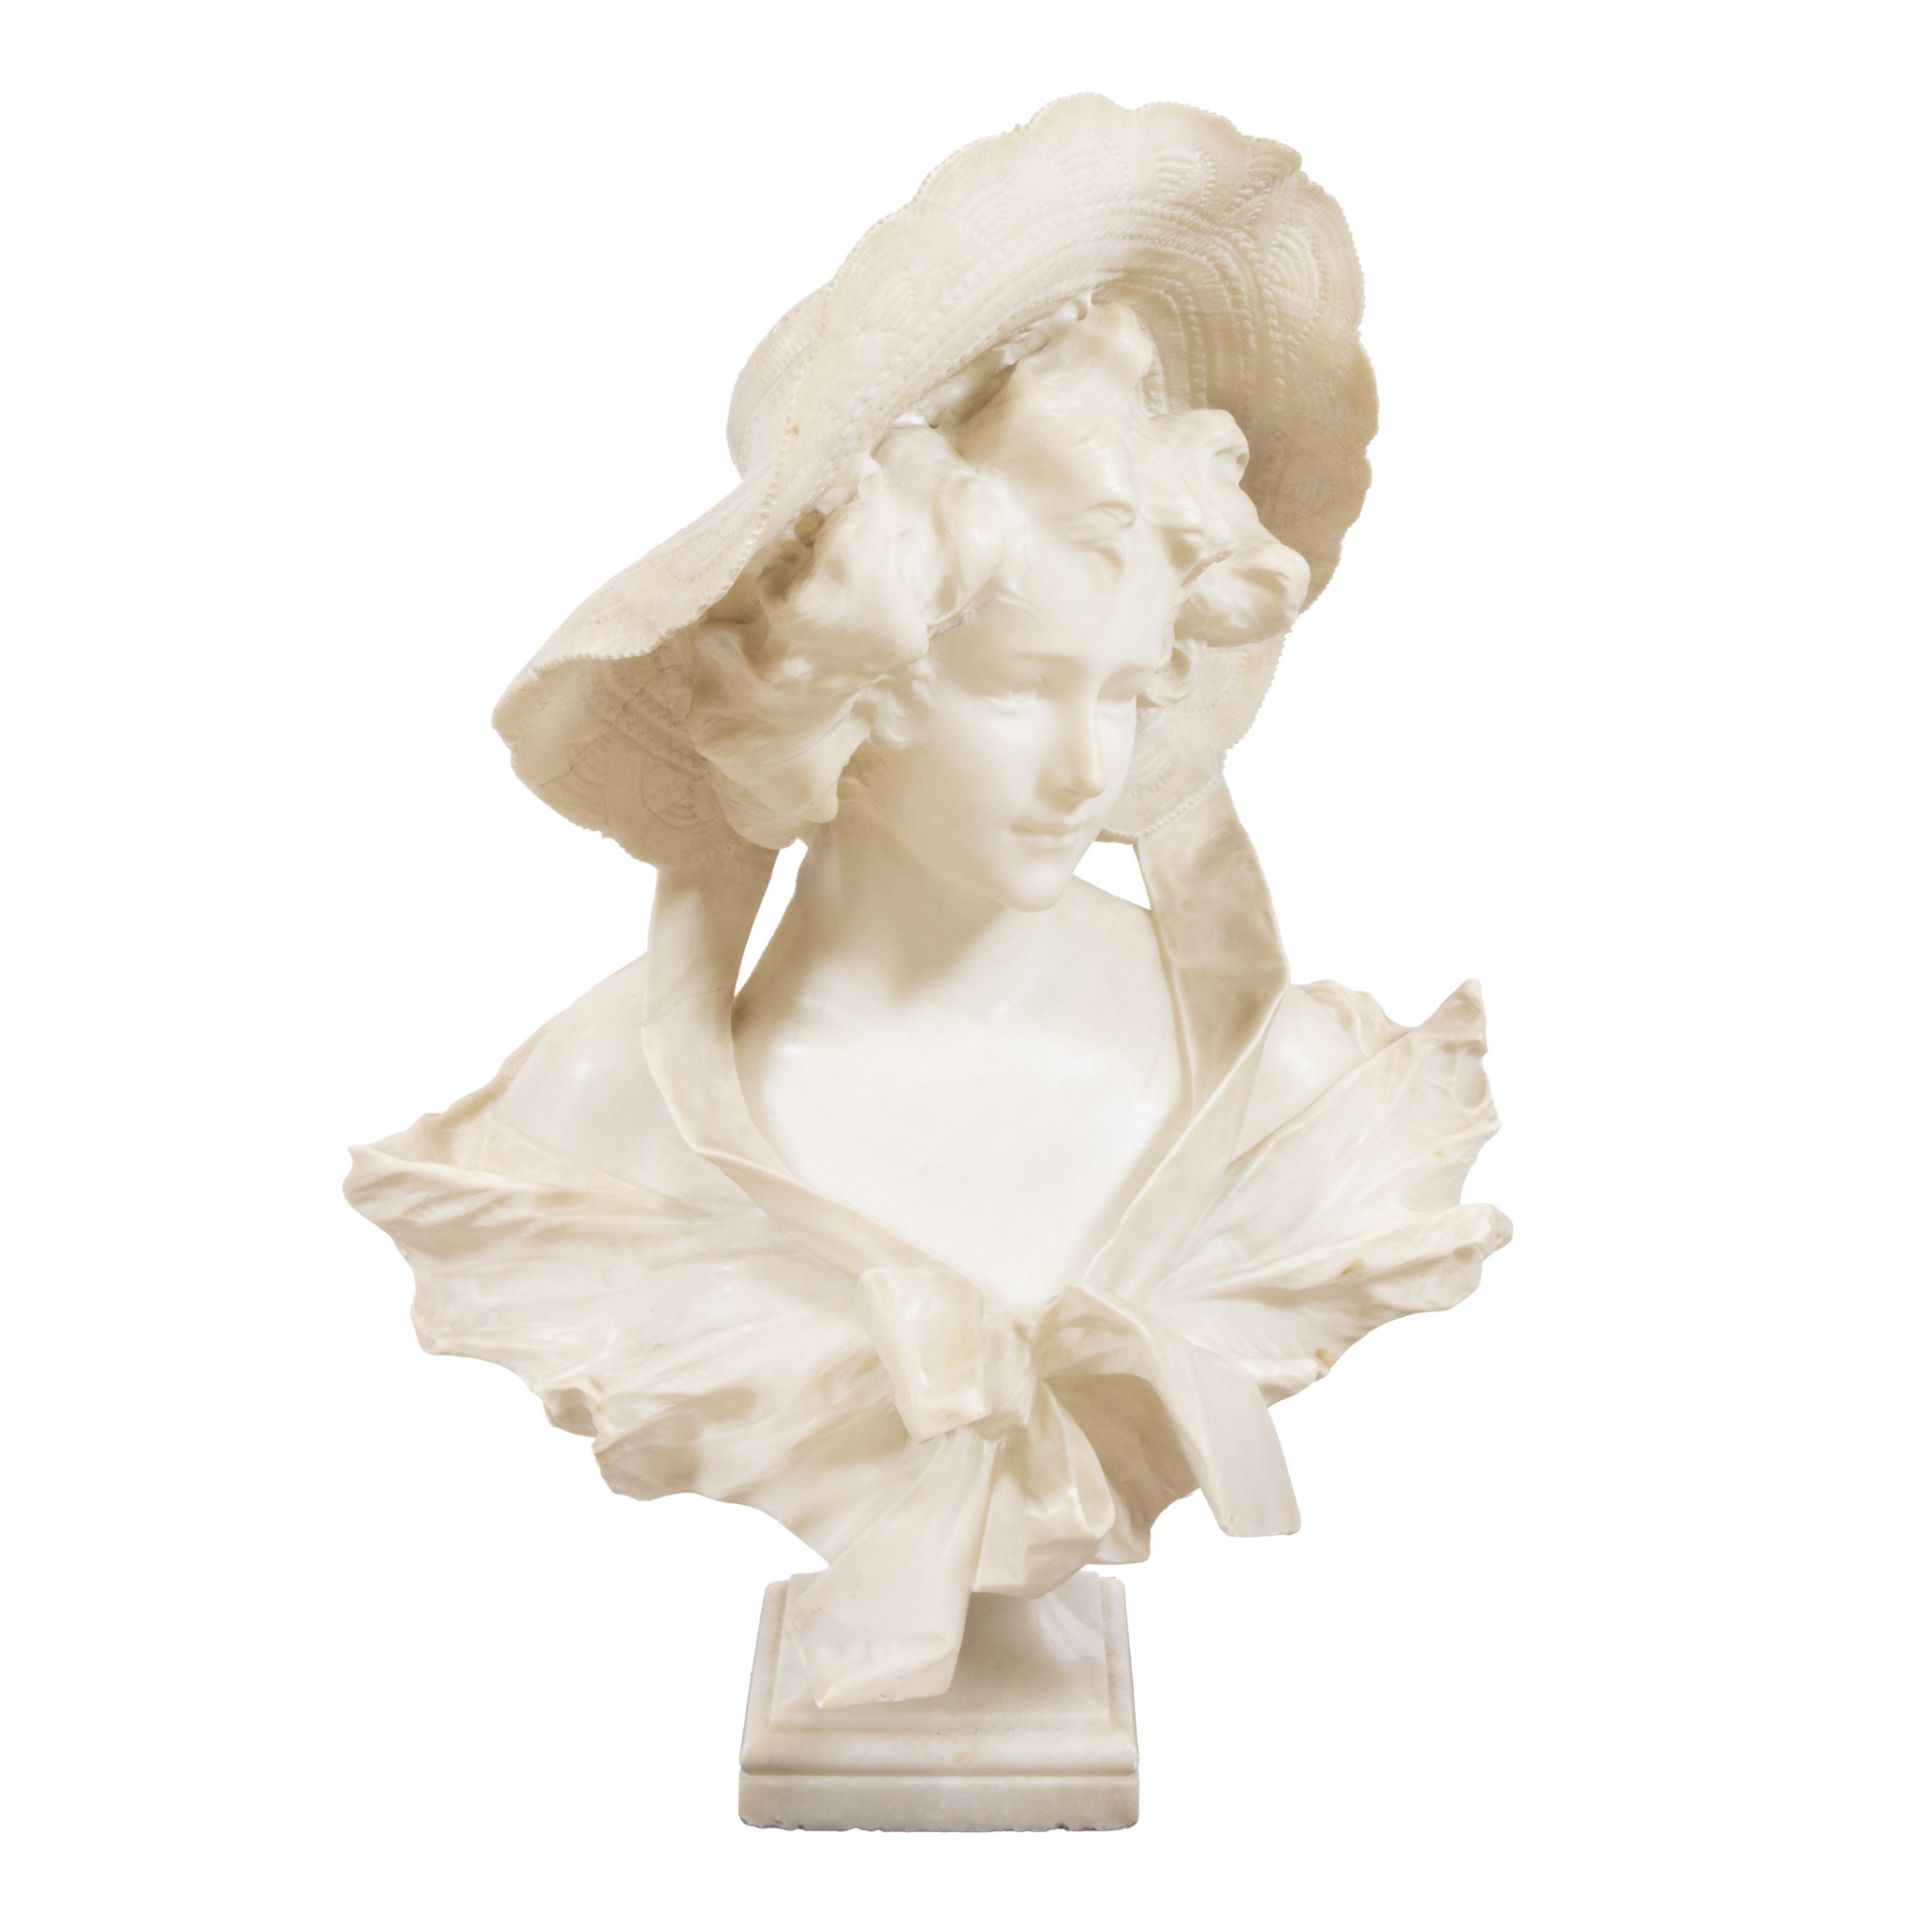 G. POCHINI (XIX), alabaster sculpture of a young lady with hat, signed